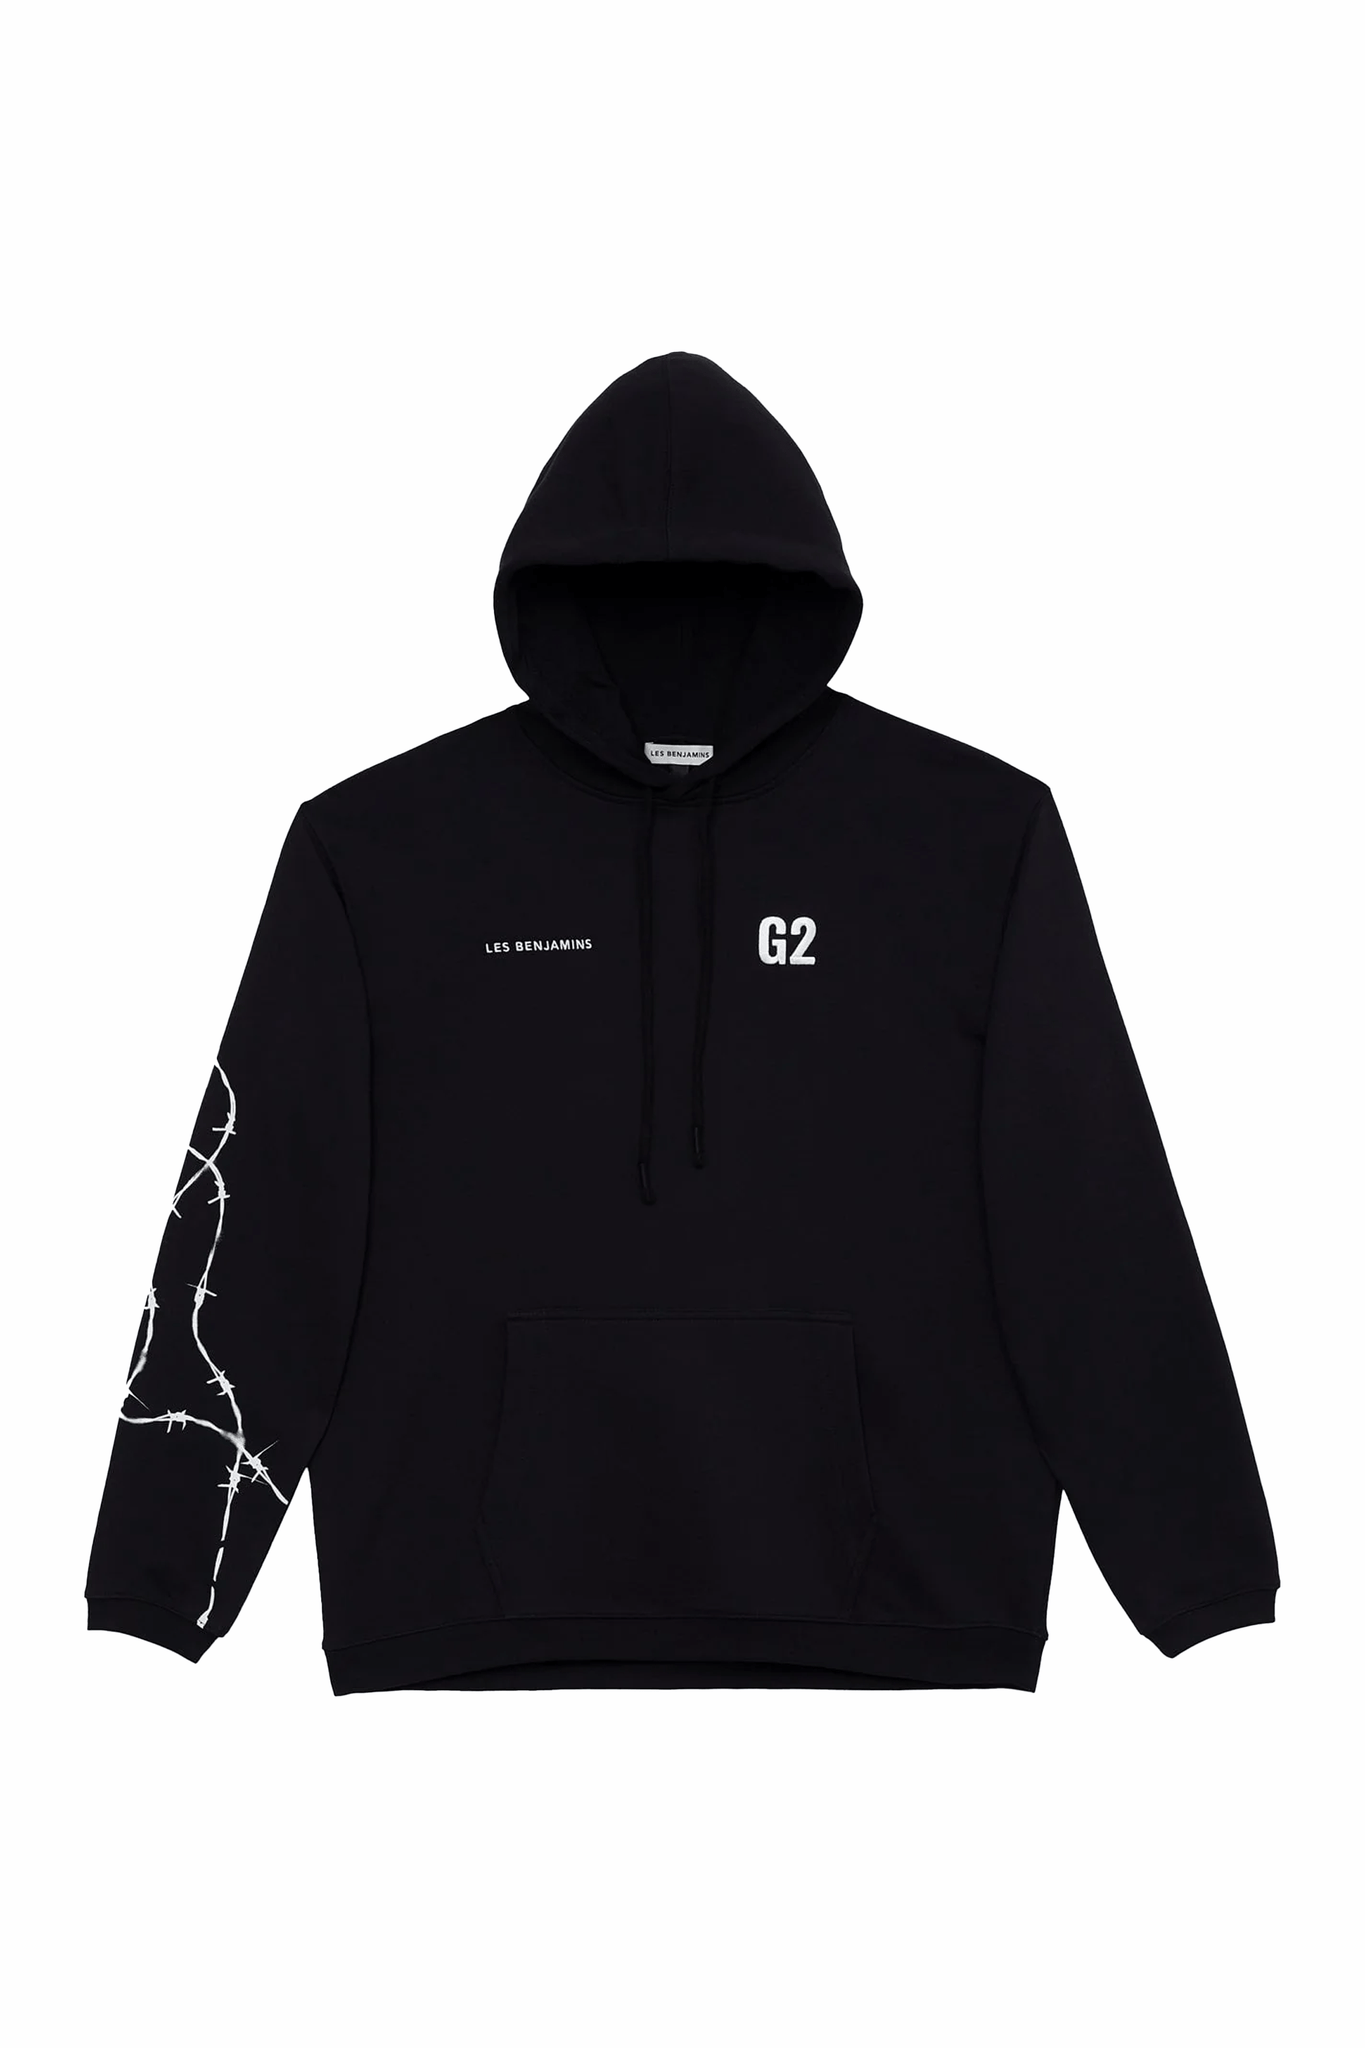 G2 x LB black hoodie, a sleek and exclusive collaboration piece. Elevate your style while supporting G2 Esports in this cozy hoodie